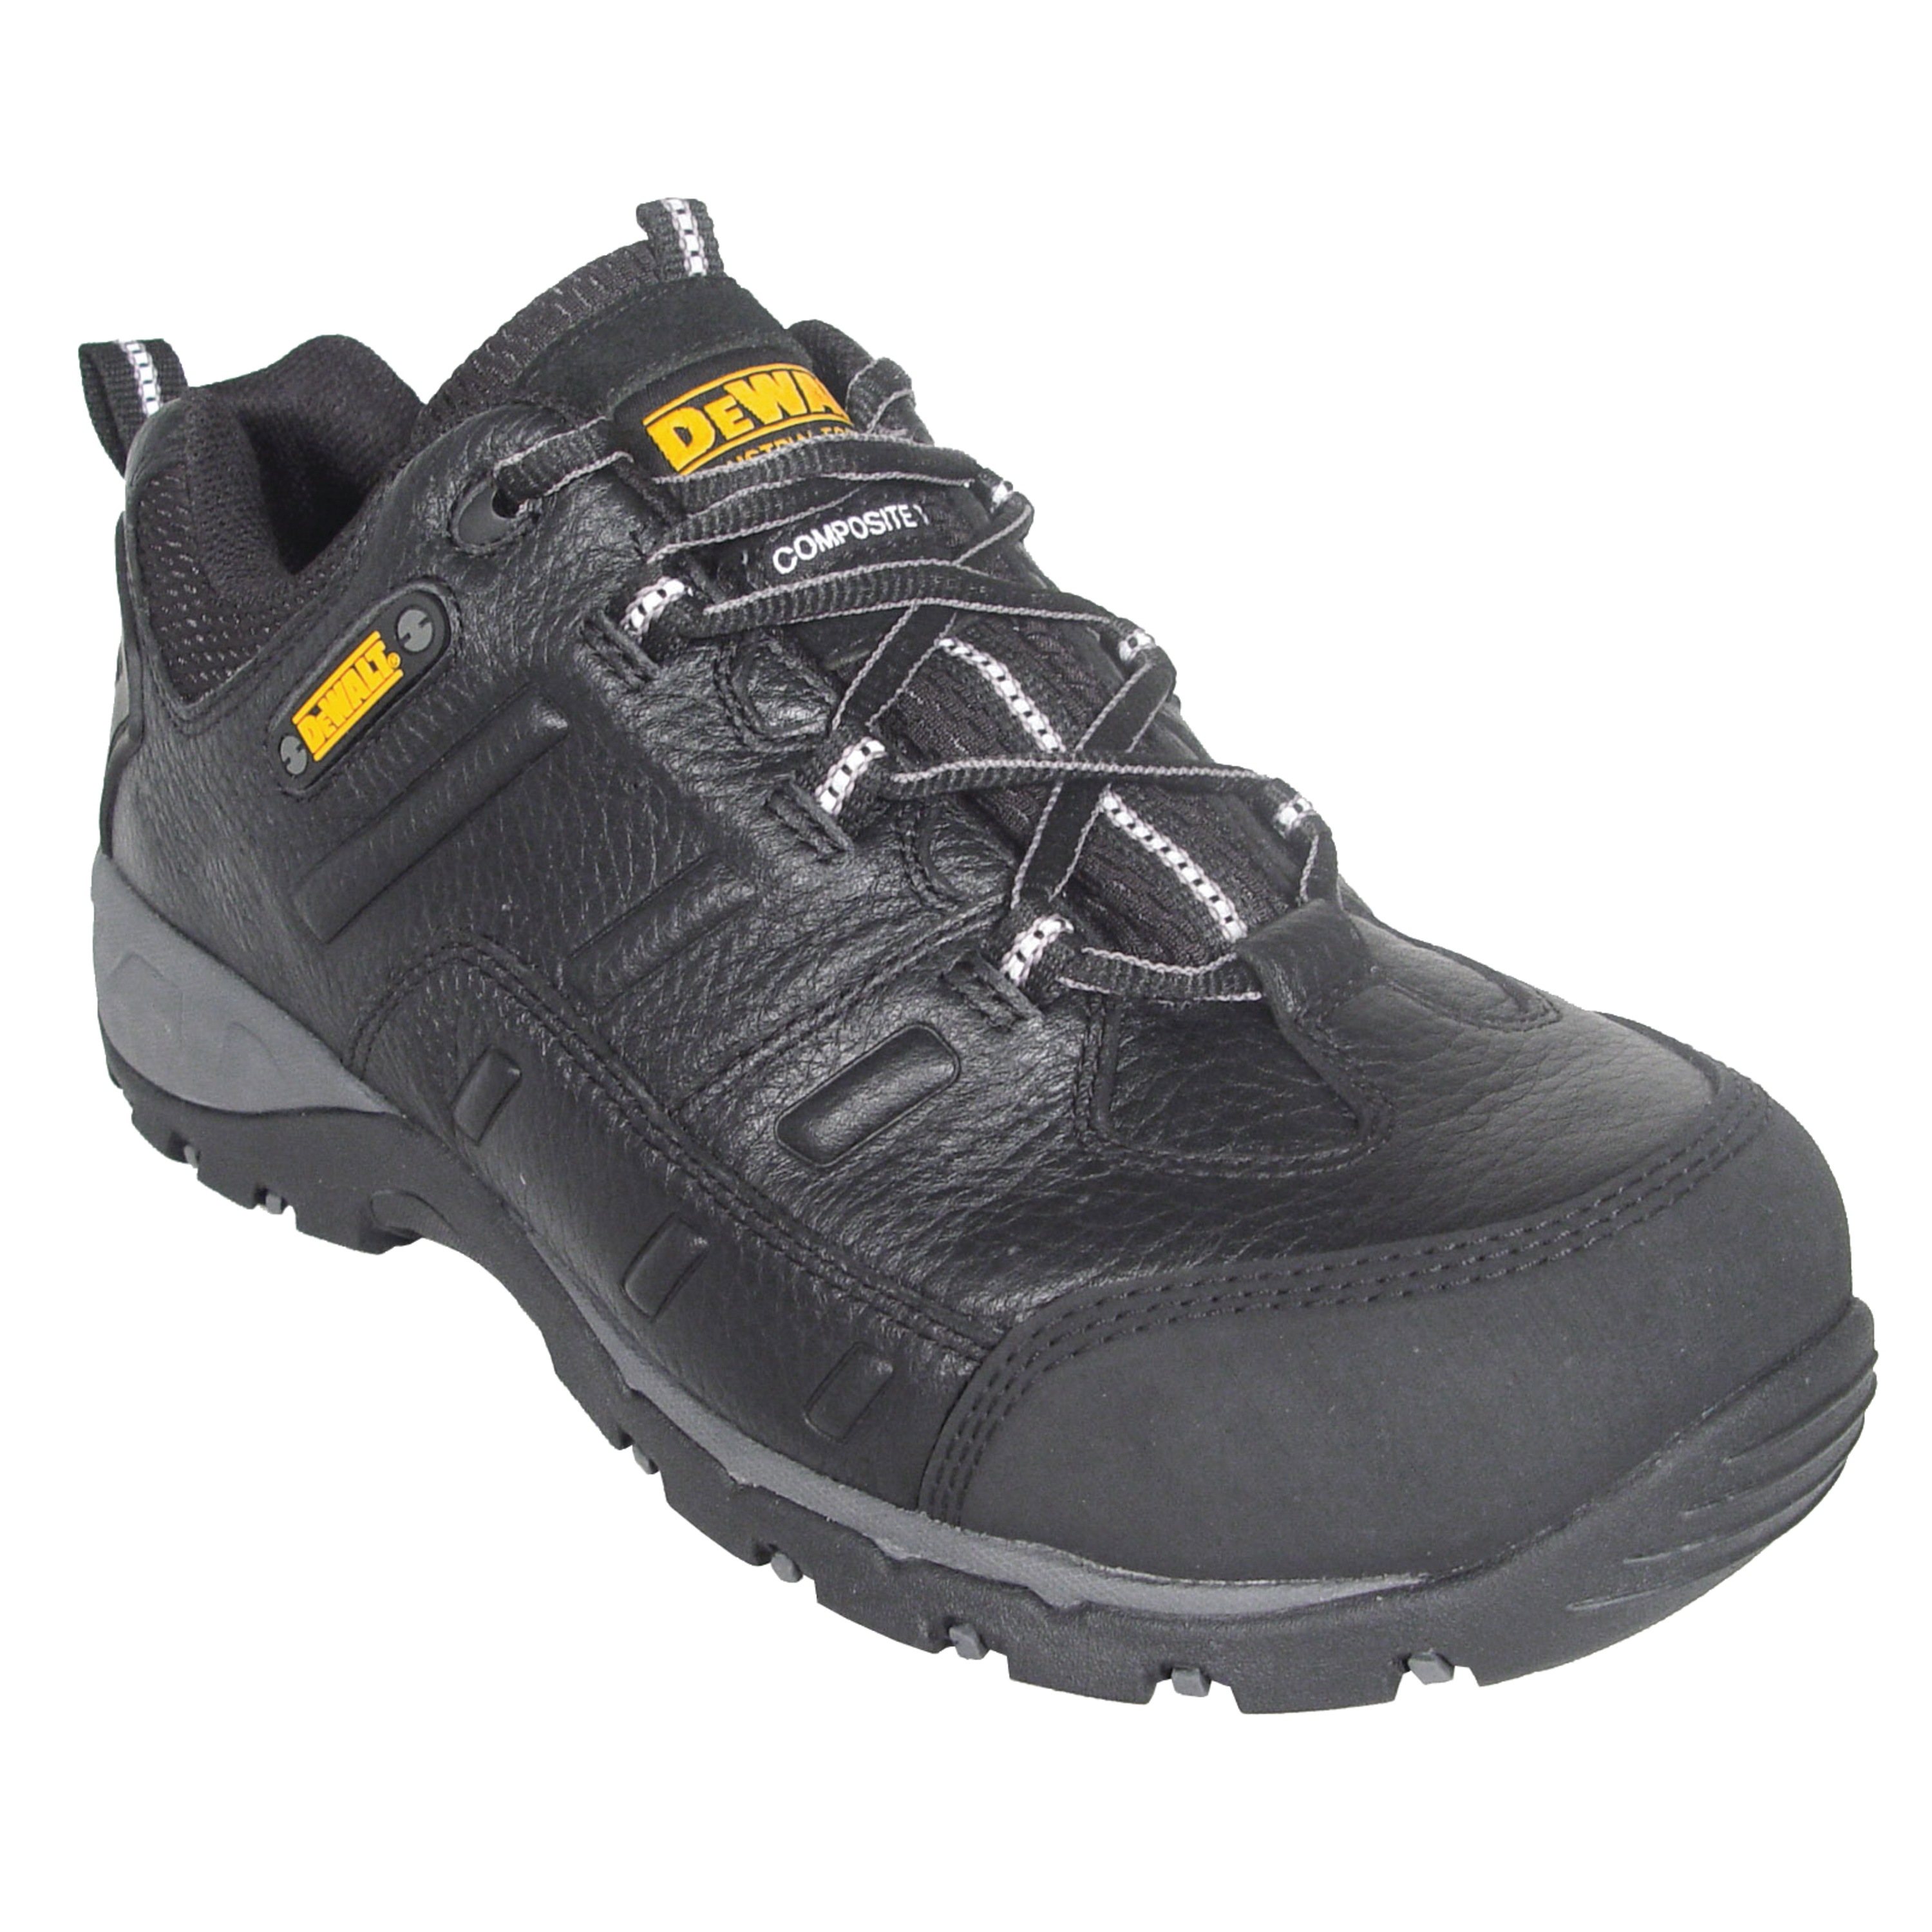 composite safety toe